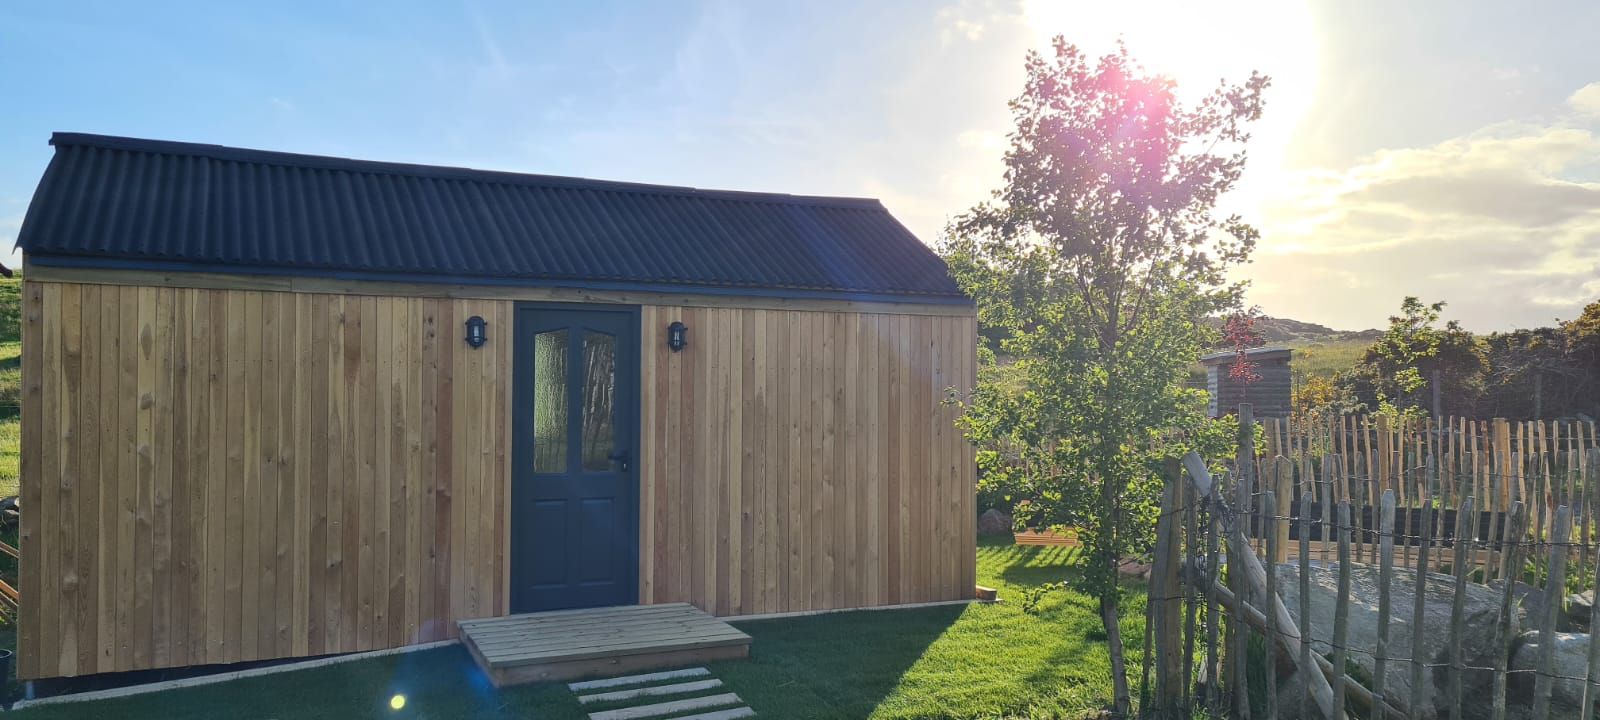 glamping, glamping ireland, accomodation, newcastle, self catering, b&b, Glamping Castlewellan, campsite, nature, environment, authentic, luxury outdoors castlewellan, tents, firepit, bbq, kitchen, forest park,  views, mourne mountains, tollymore, life adventure centre